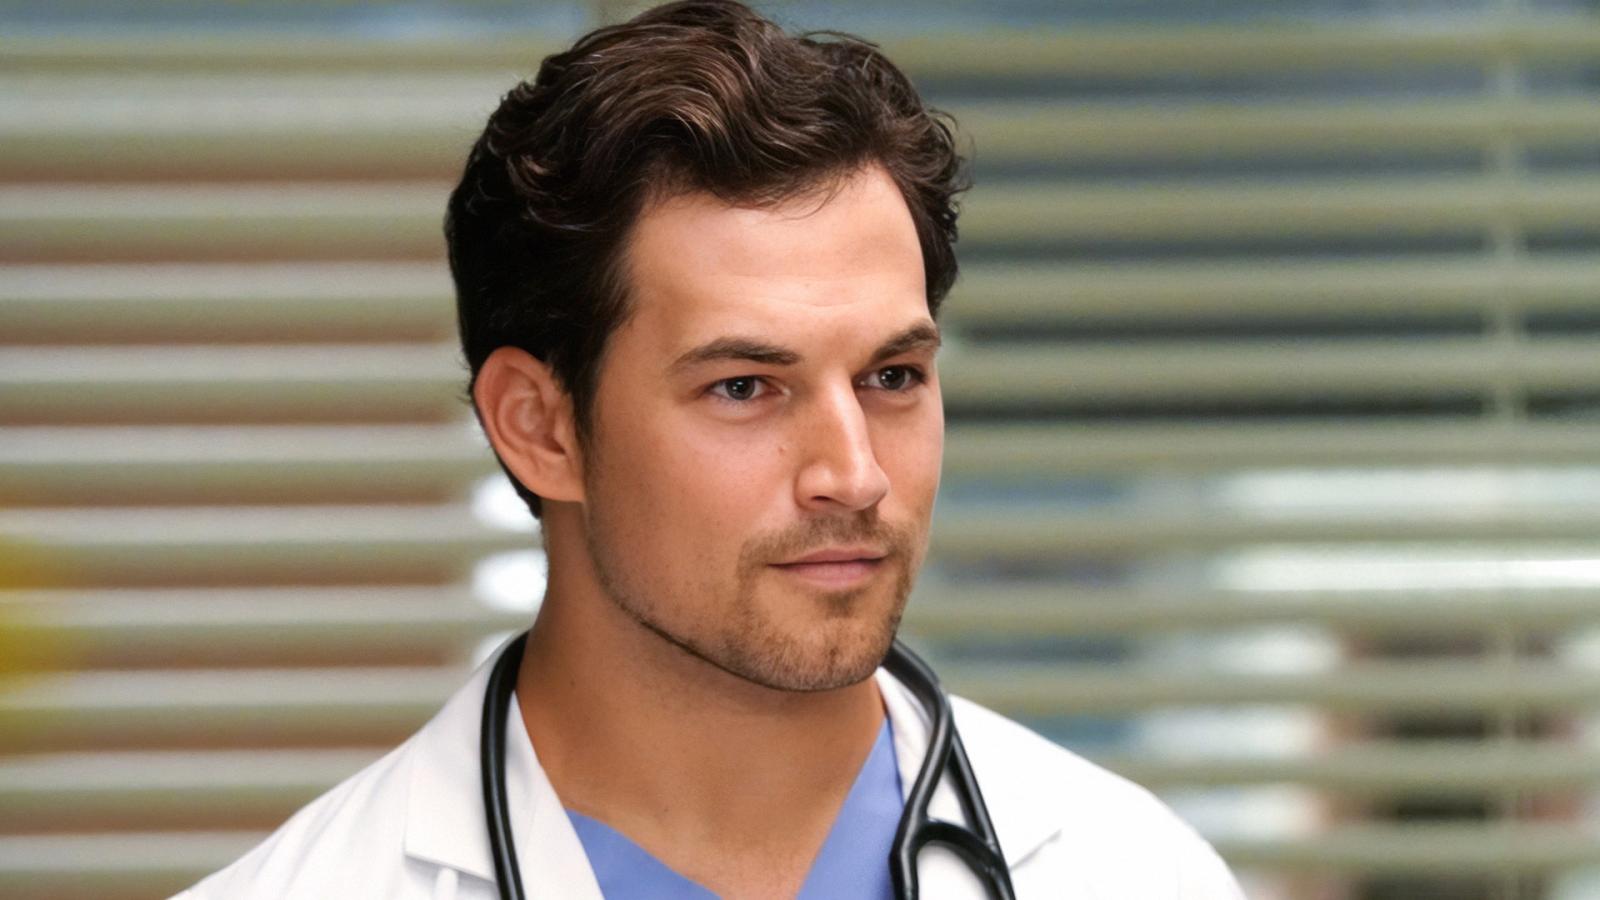 Move Over, McDreamy: Ranking the 8 Hottest Male Doctors on TV - image 7